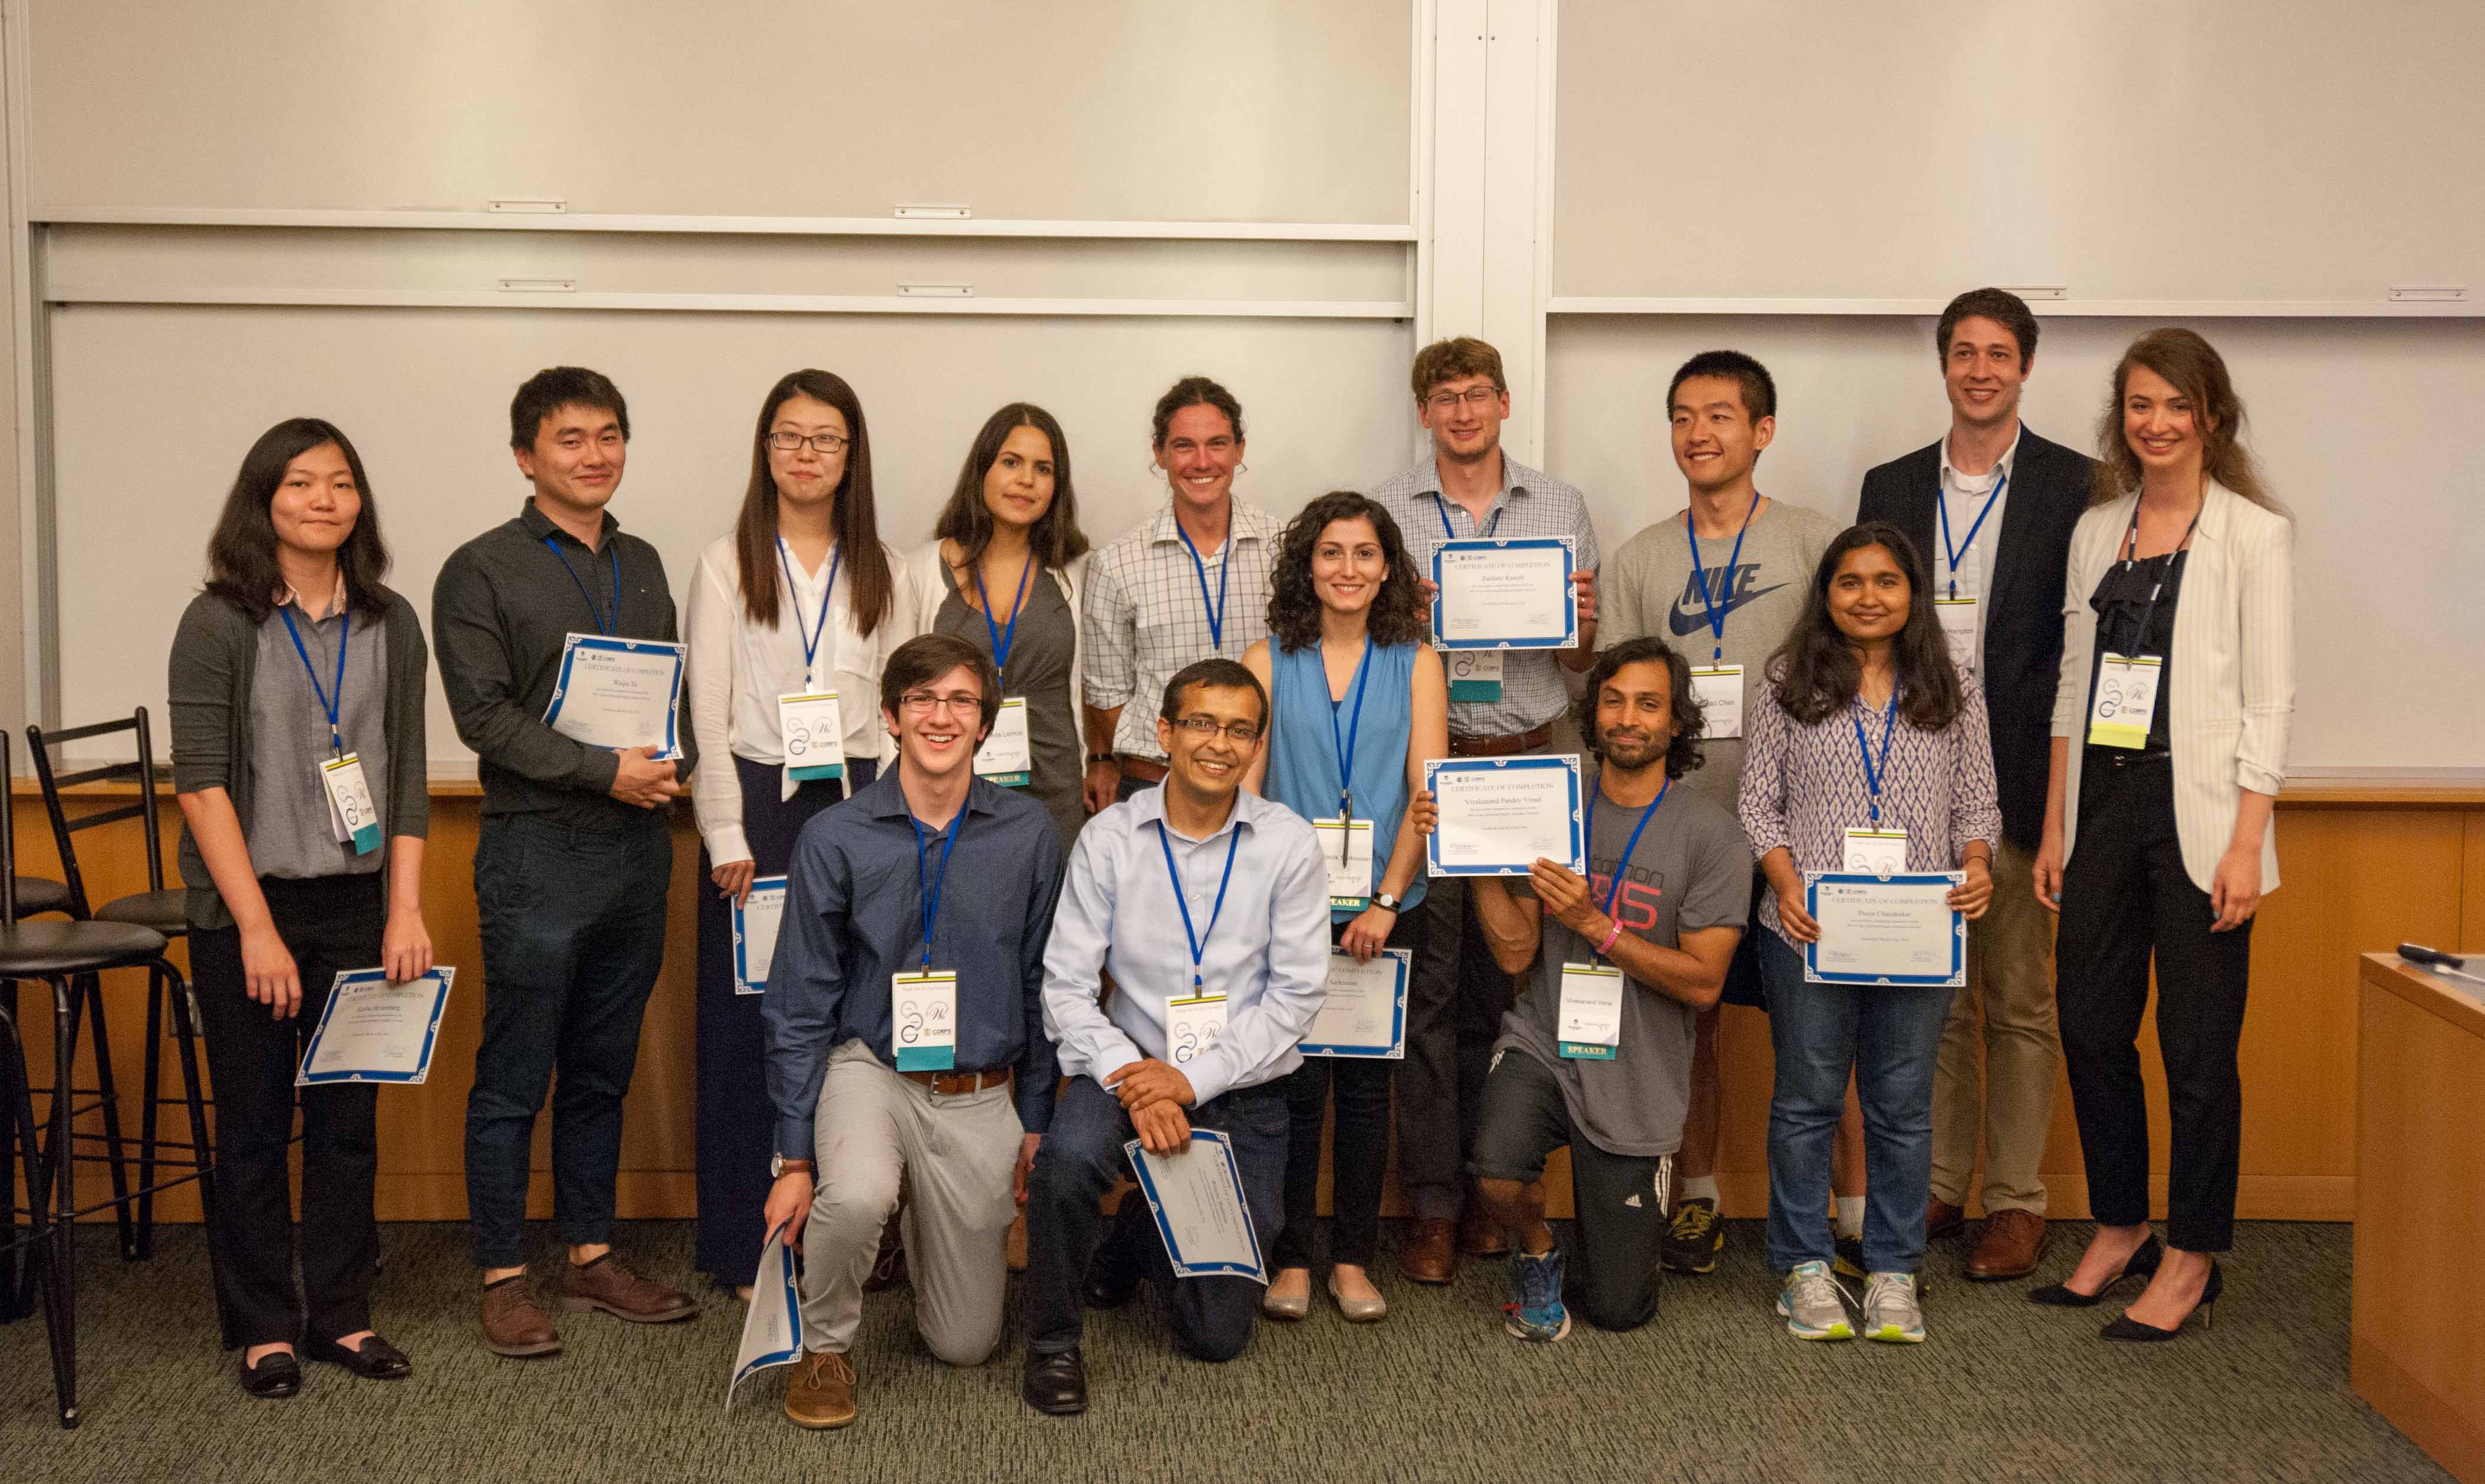 Brandeis University's National Science Foundation I-Corps fellows at the HackMyPhD event.